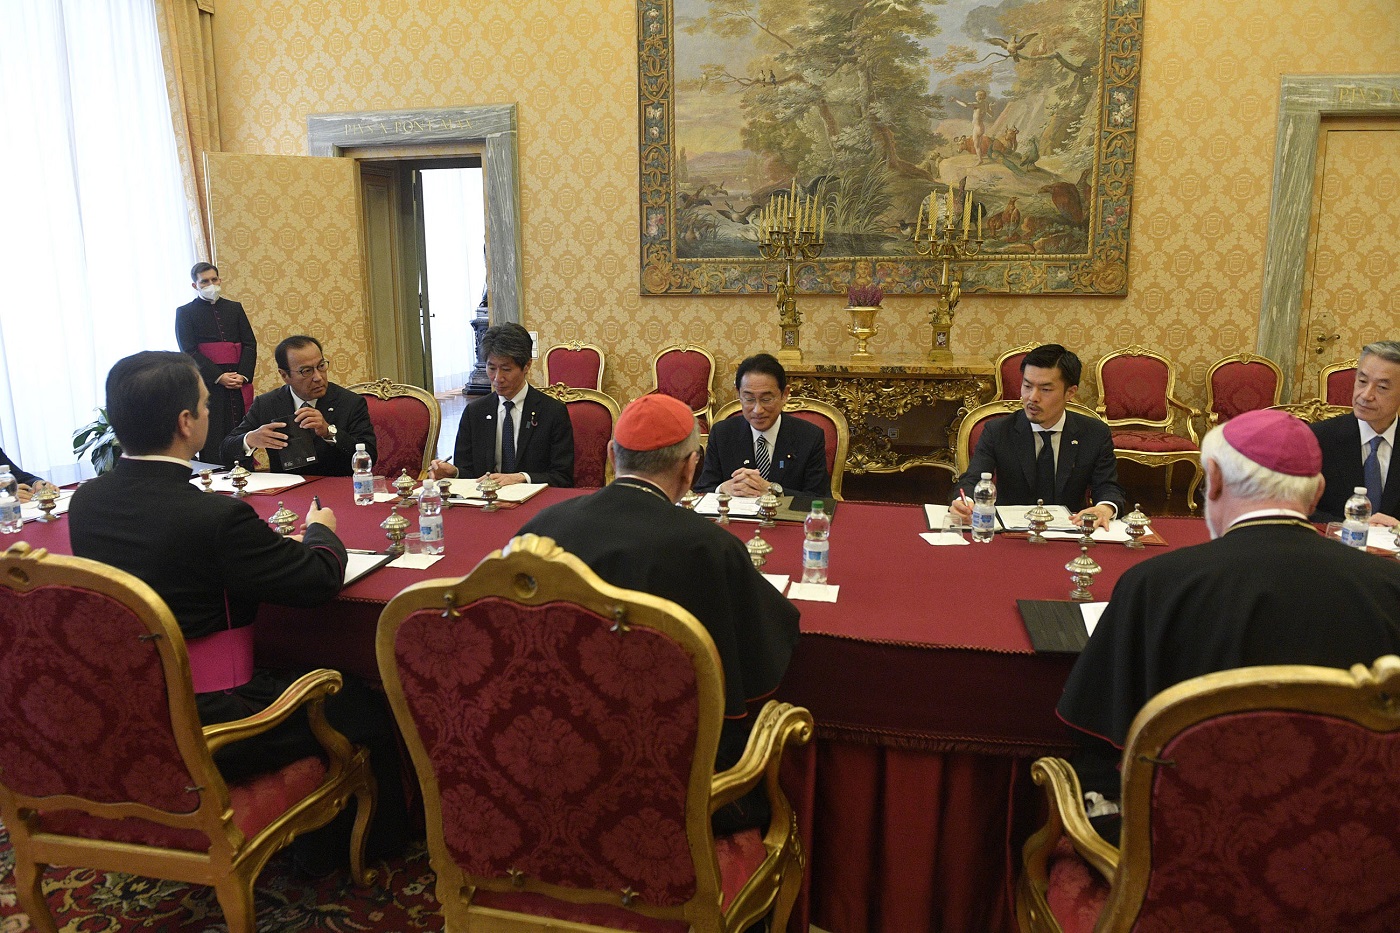 Photograph of the Japan-Vatican Summit Meeting (photo courtesy of VaticanMedia) (2)